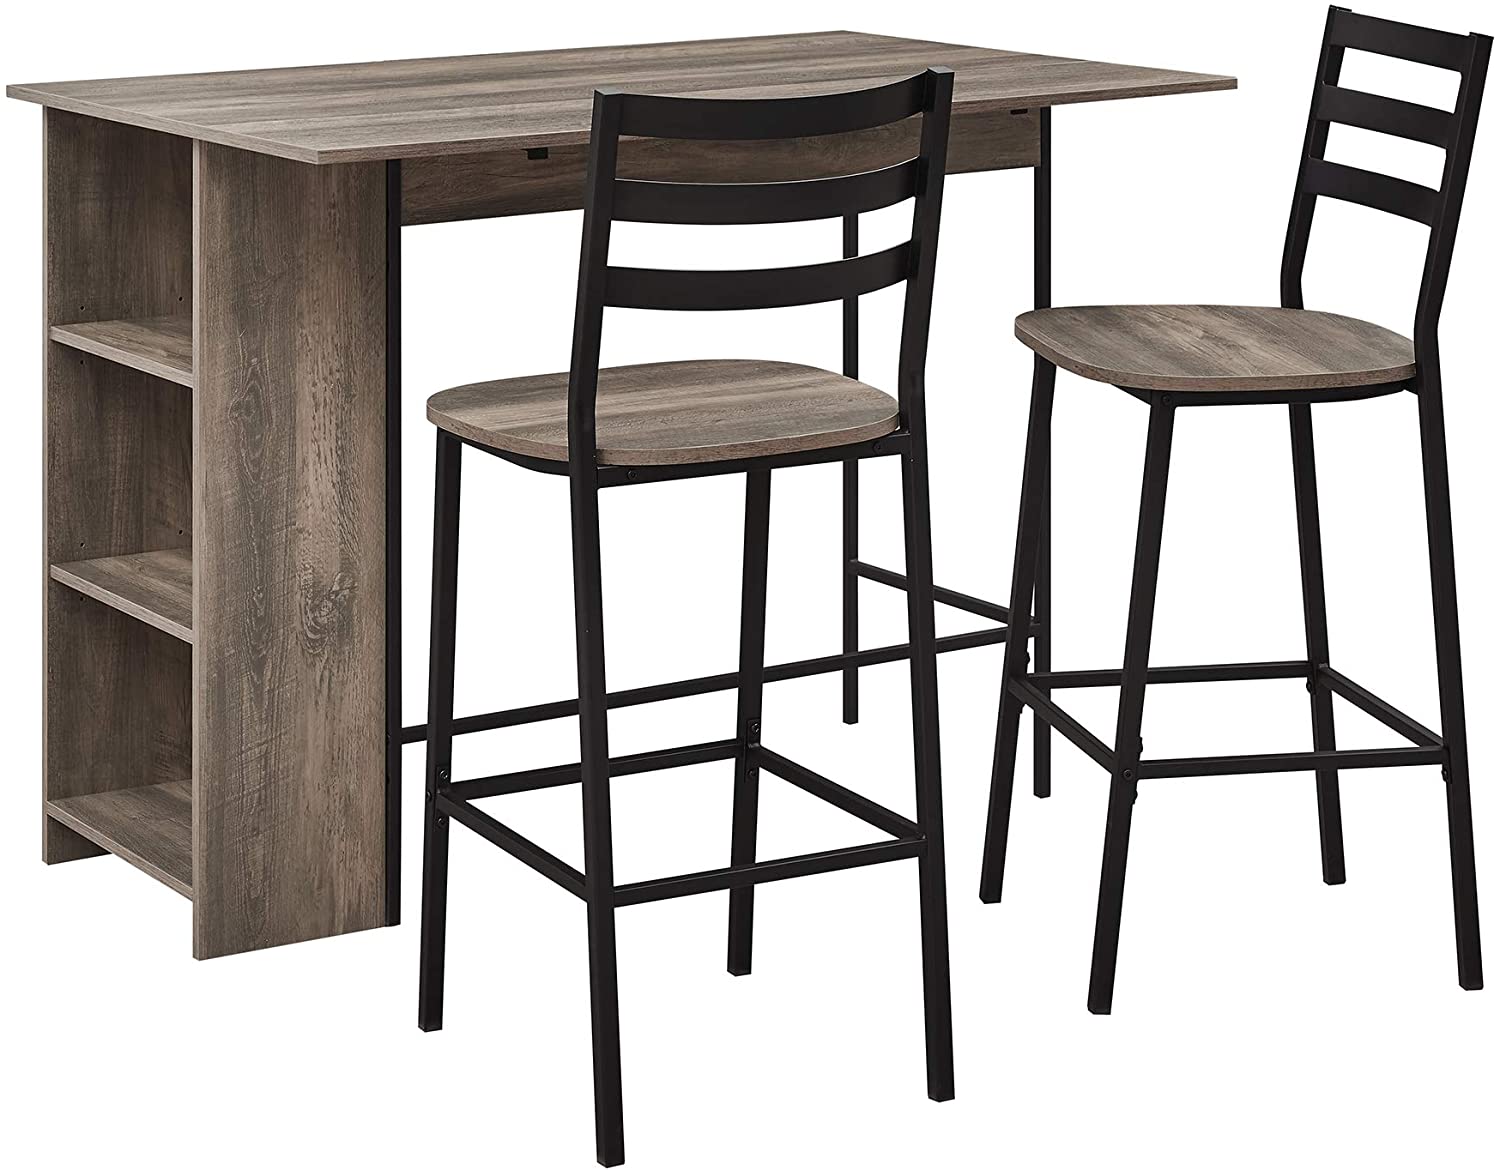 Industrial Height Bar 3-piece Table Chair Set For Small Space With Storage Featured Image